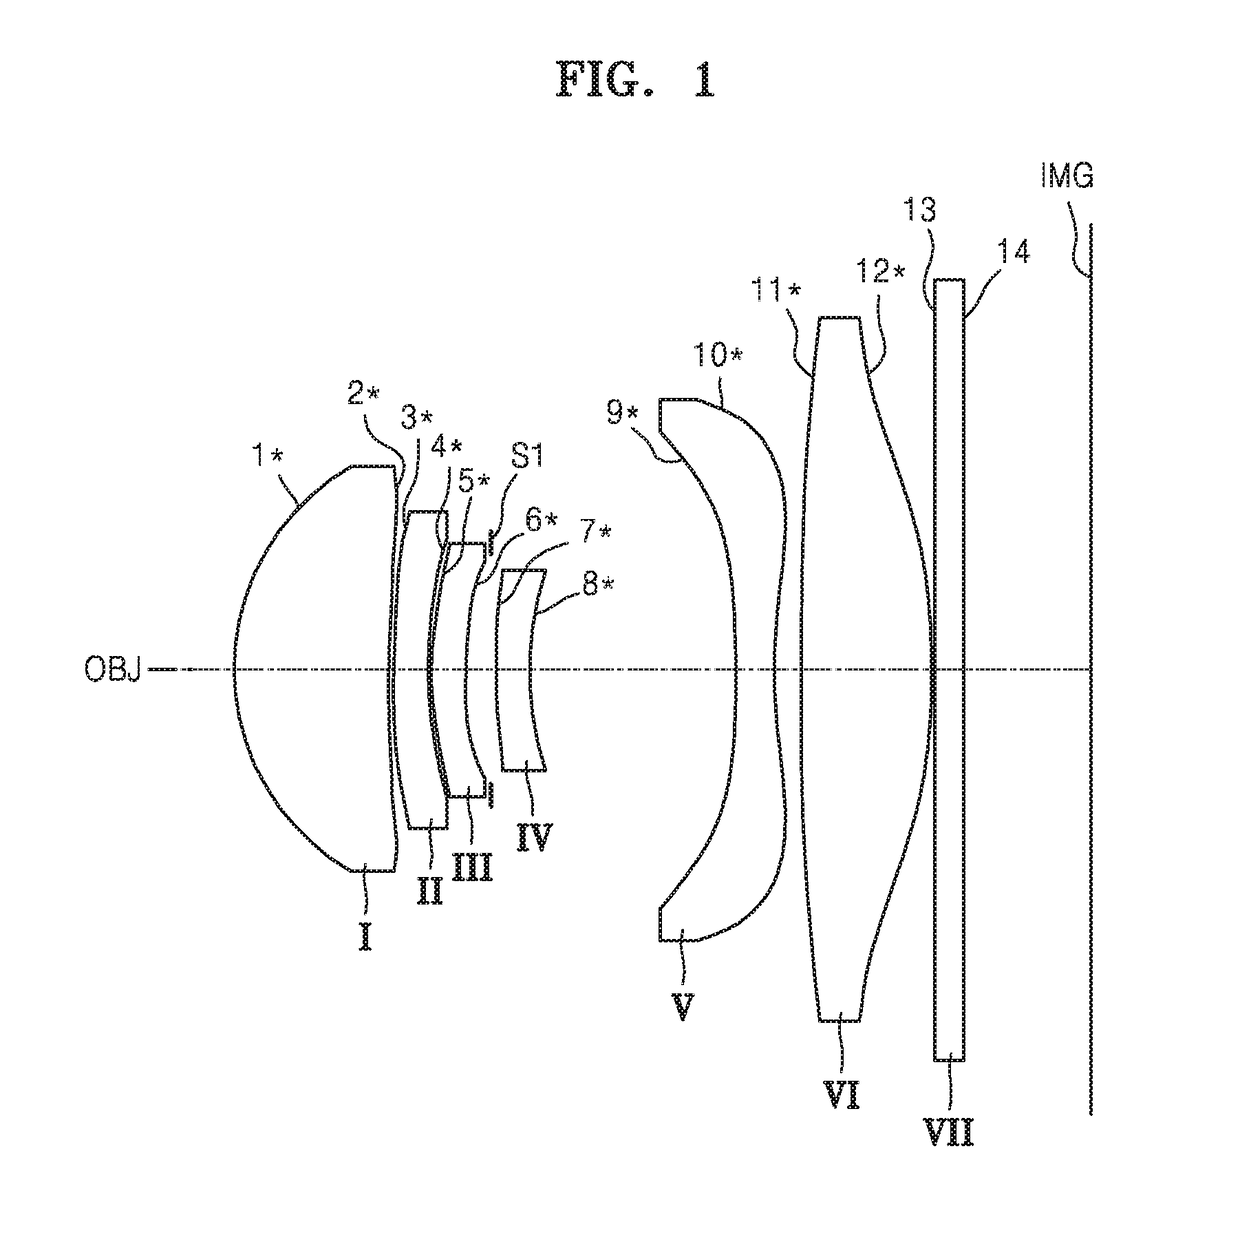 Photographic optical lens system